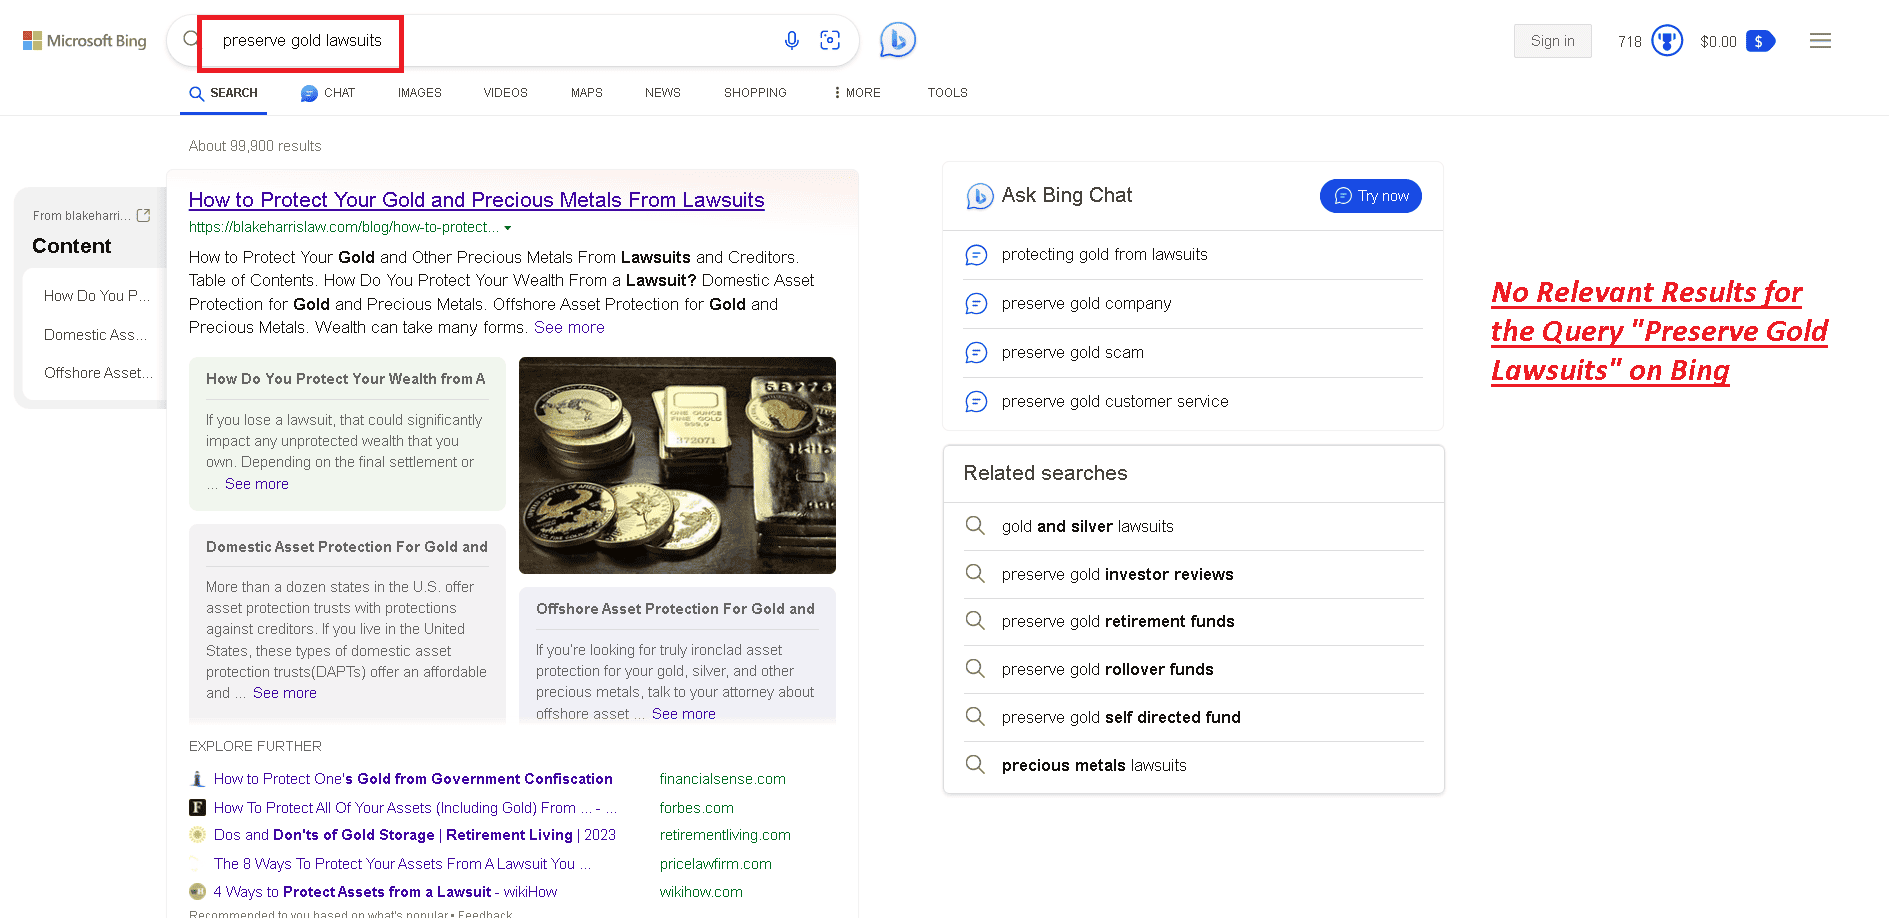 no results on Bing for the query "Preserve Gold lawsuits"